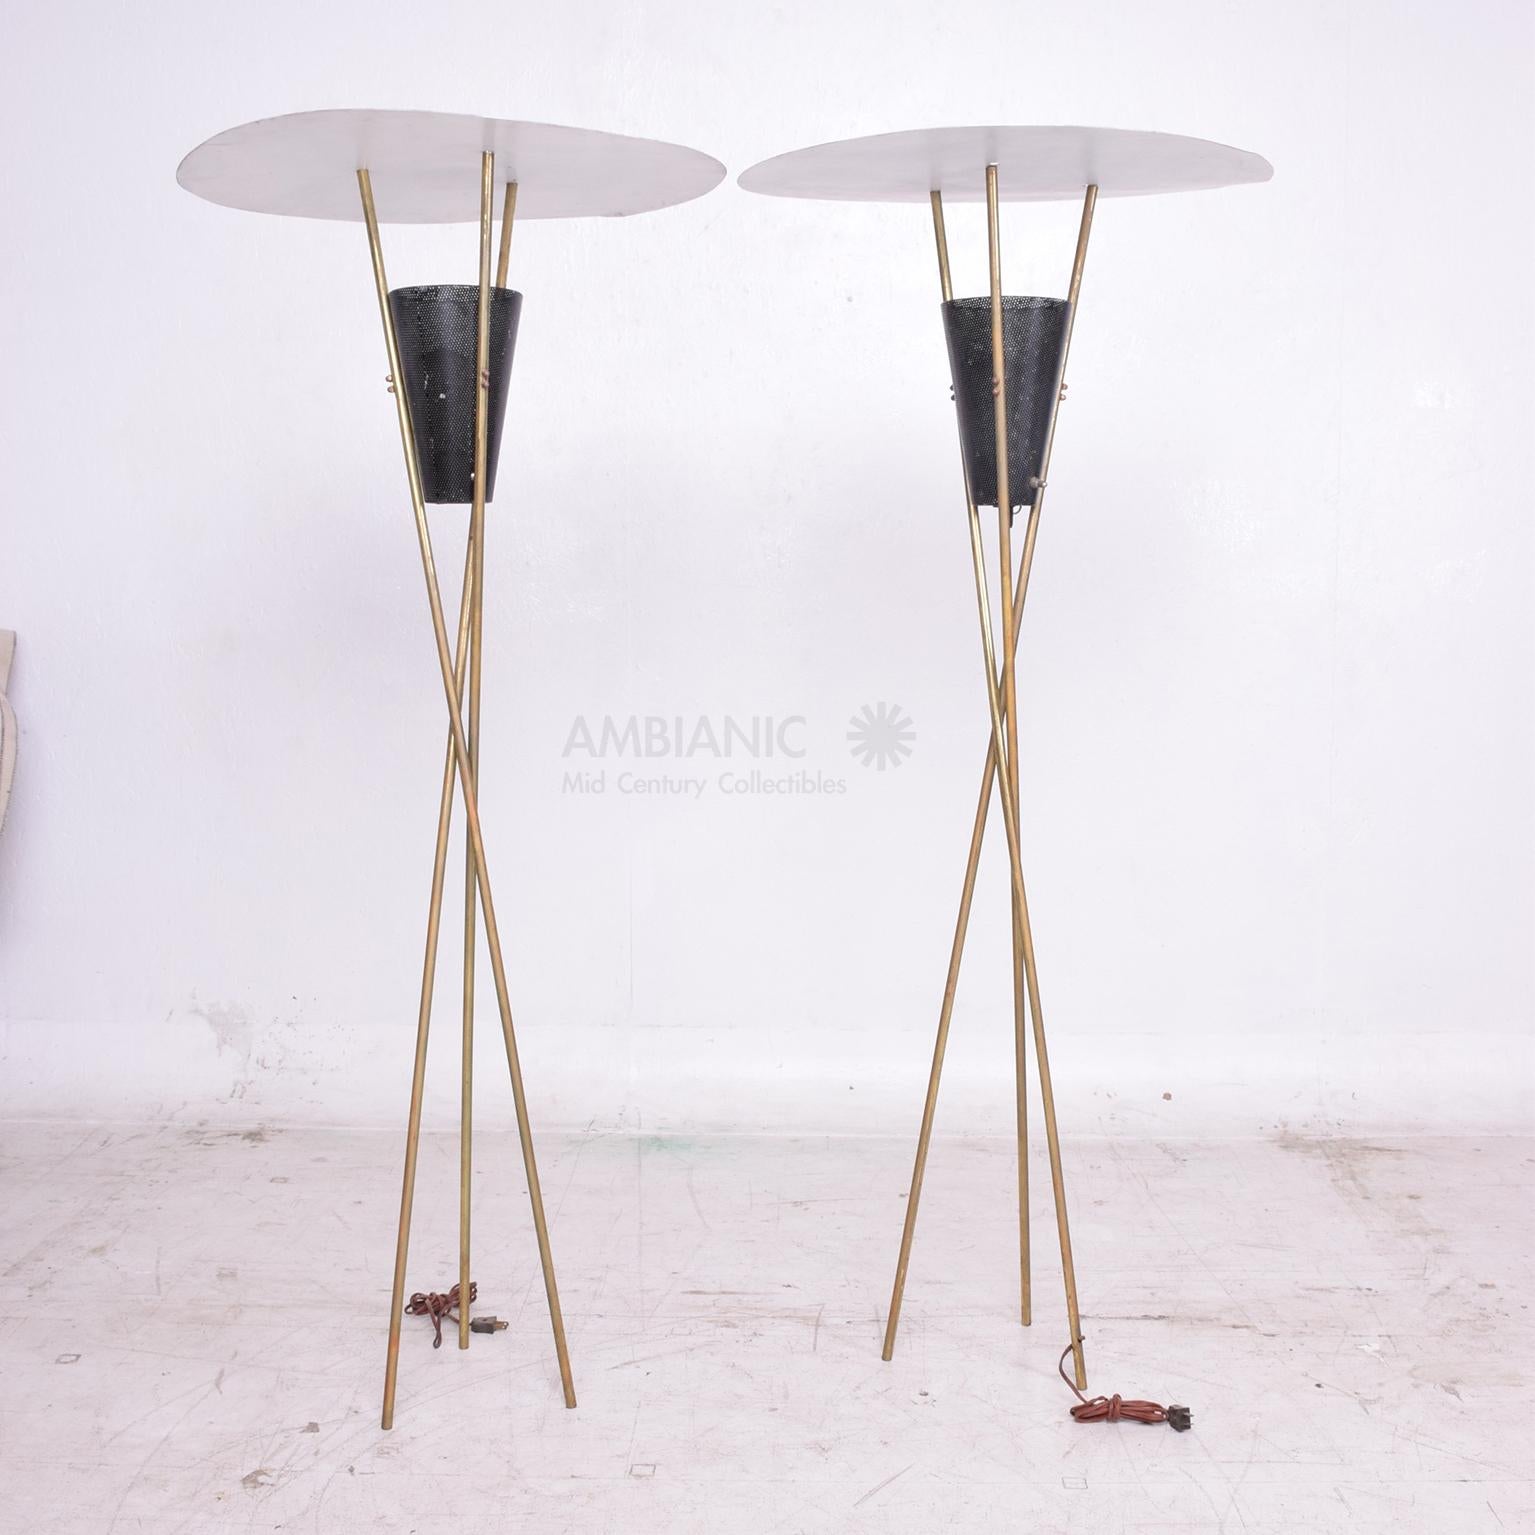 Mid-20th Century Tripod Torchieres Two Floor Lamps Brass 1960s Modern Twist Style Gerald Thurston